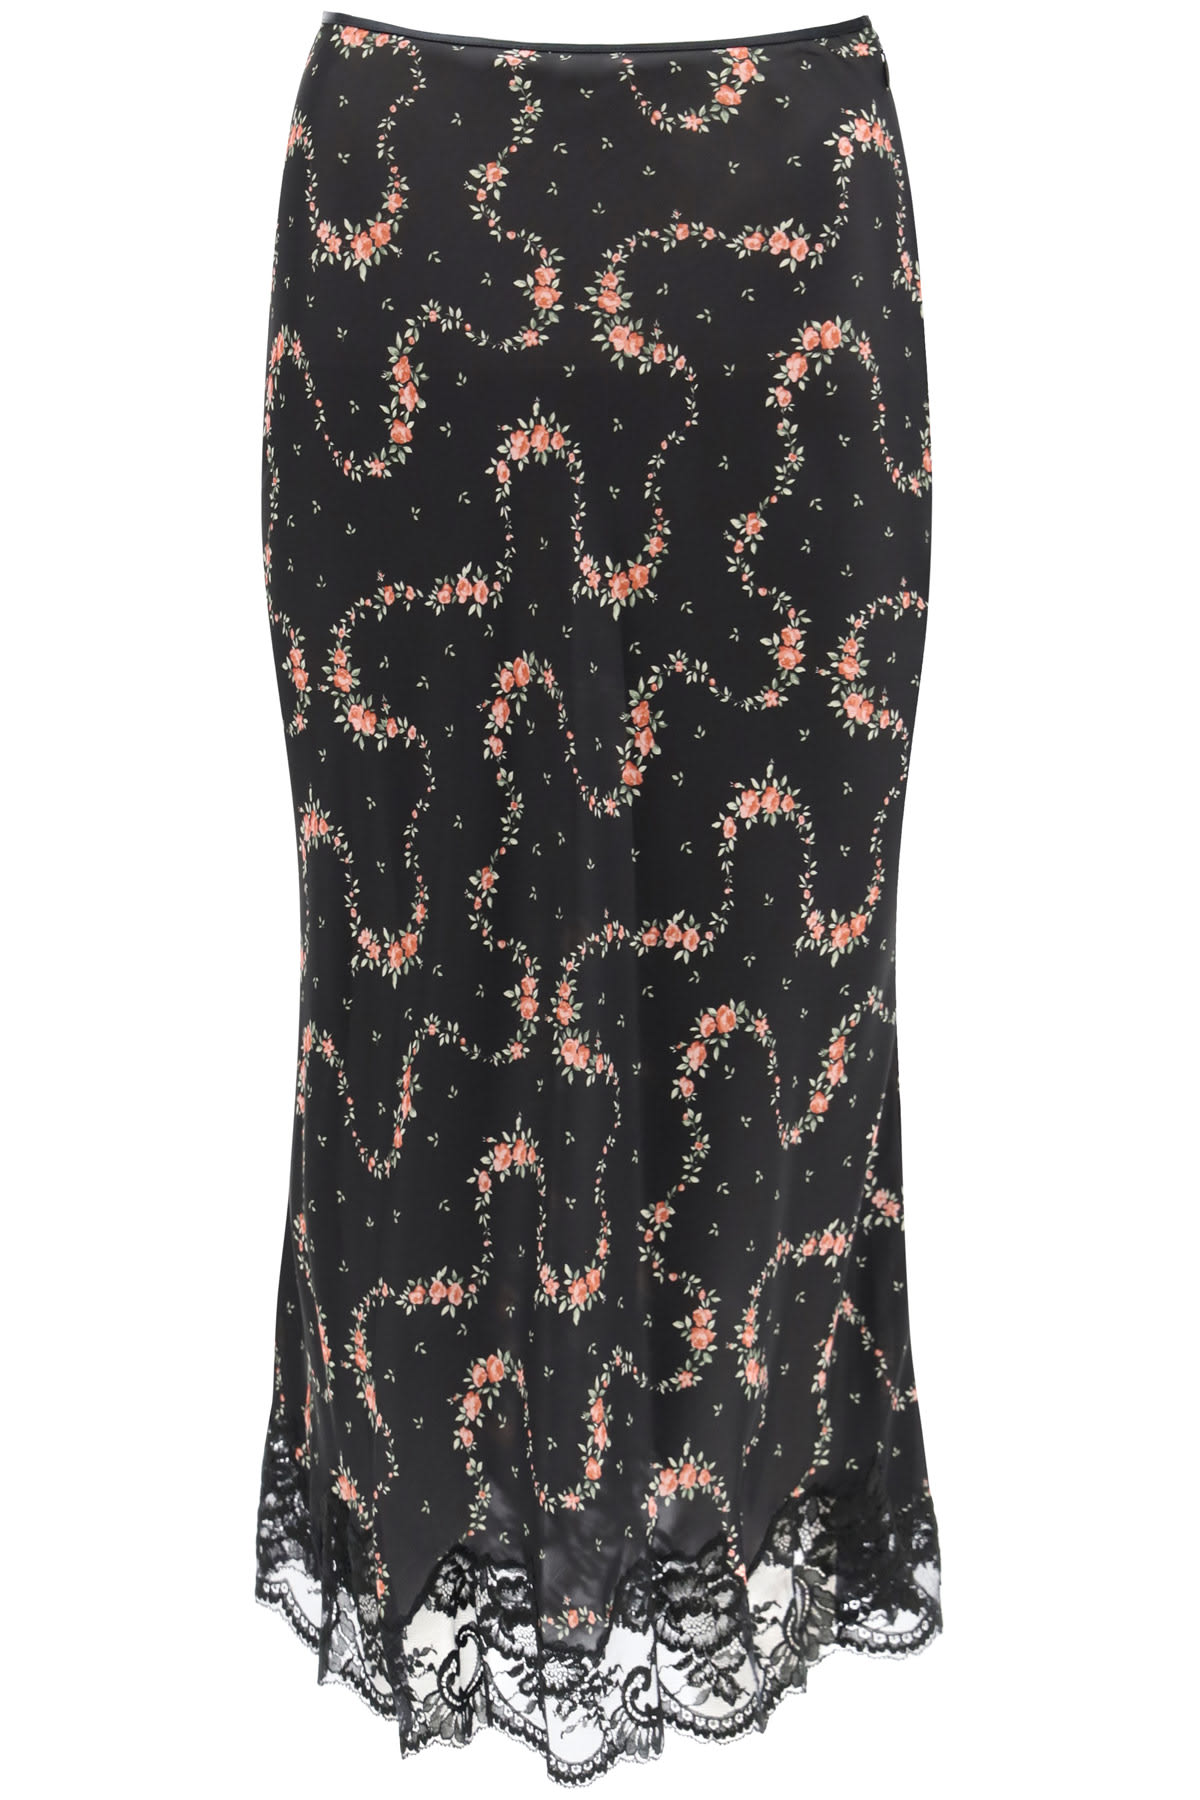 Paco Rabanne Floral Skirt With Lace